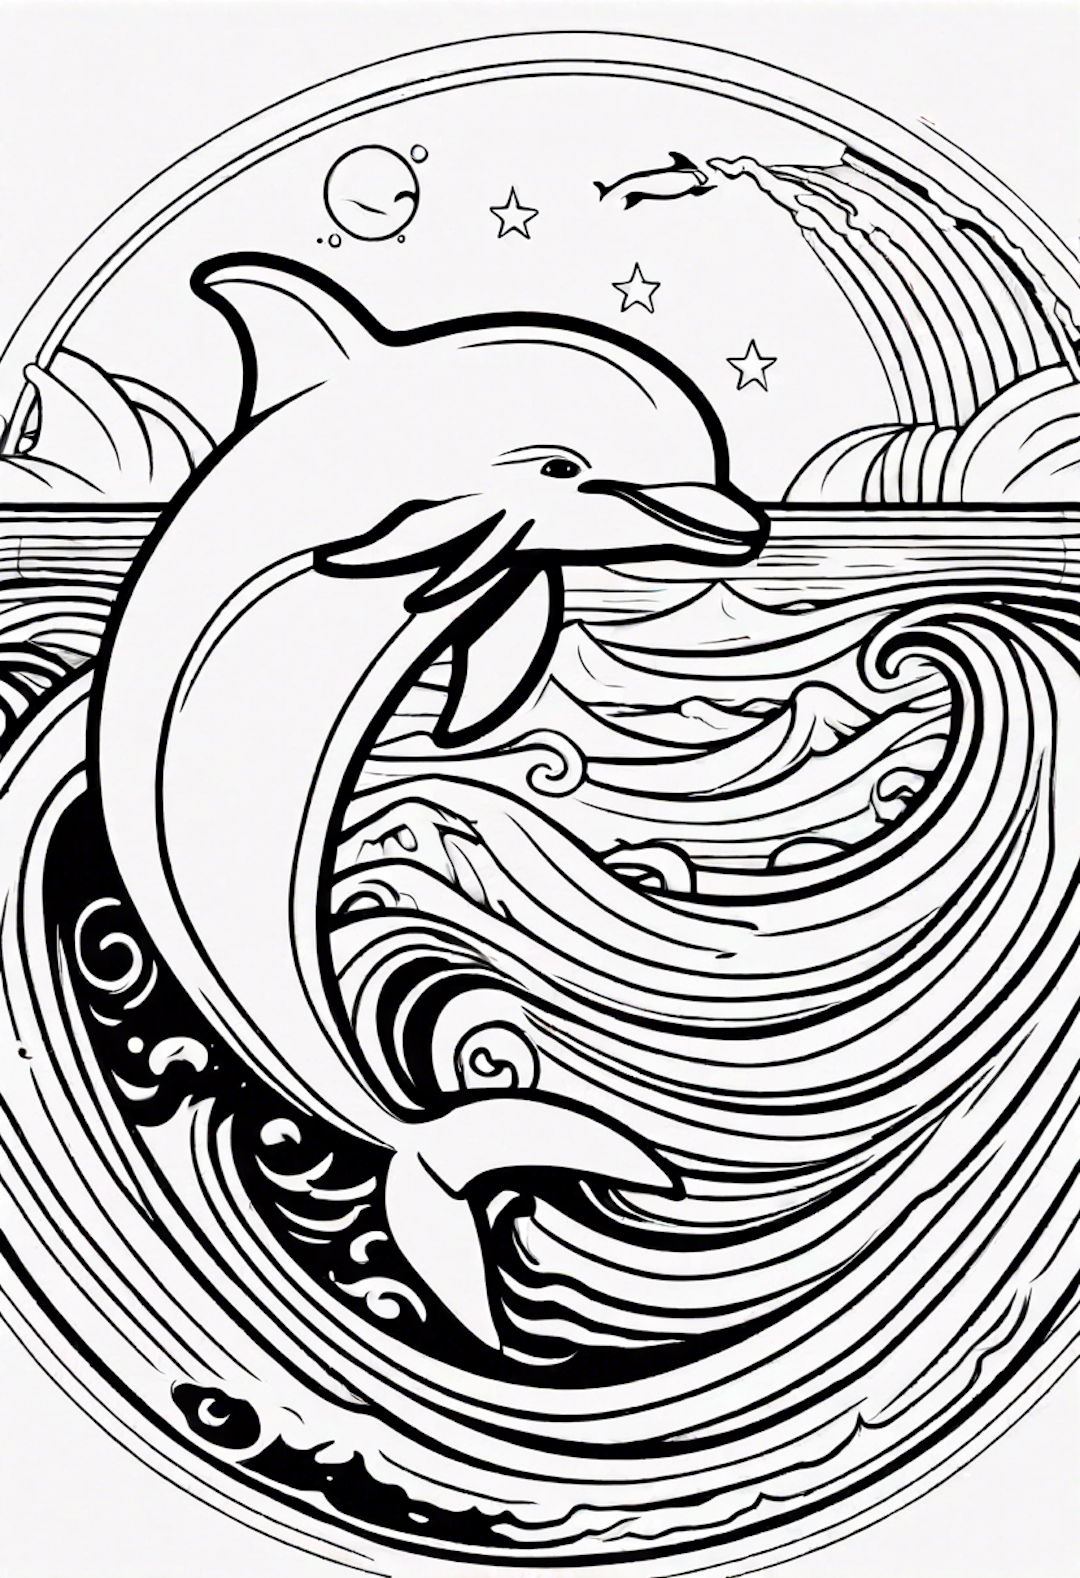 An Excited Star Surfing The Waves With A Playful Dolphin